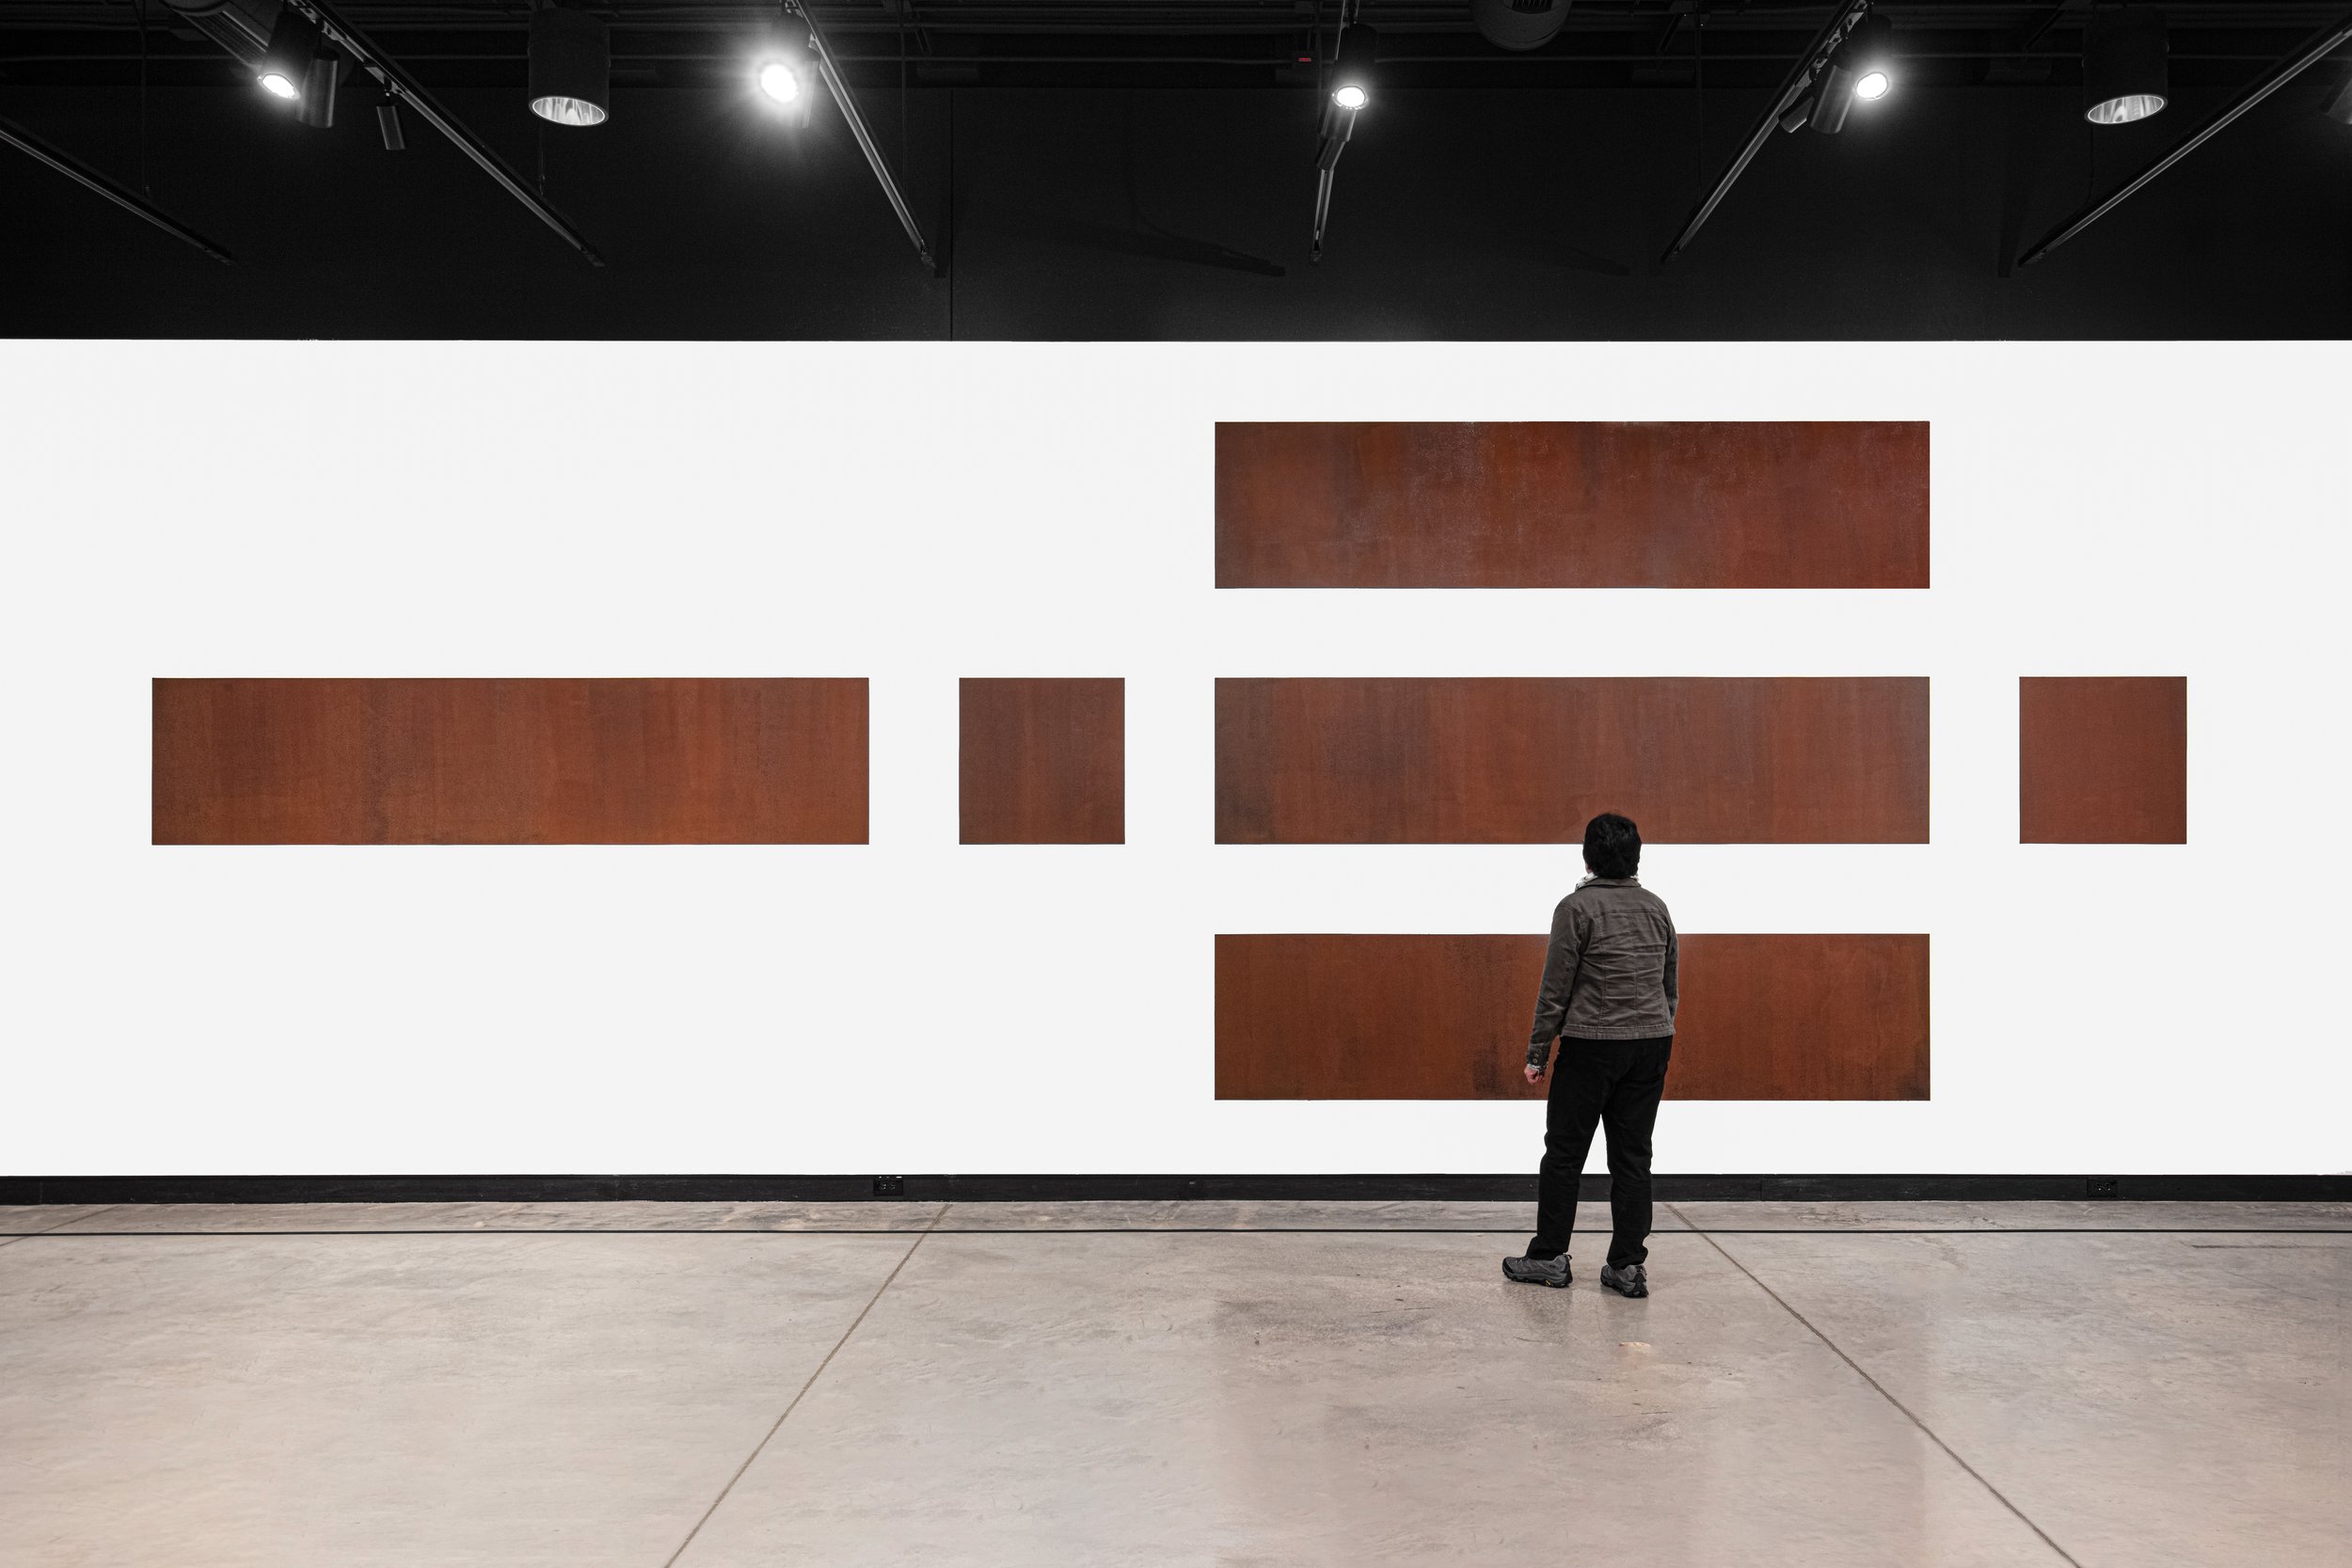  Individual admires “Rust in Peace” artwork. A depiction of each side of a box that would hold a nuclear weapon. 